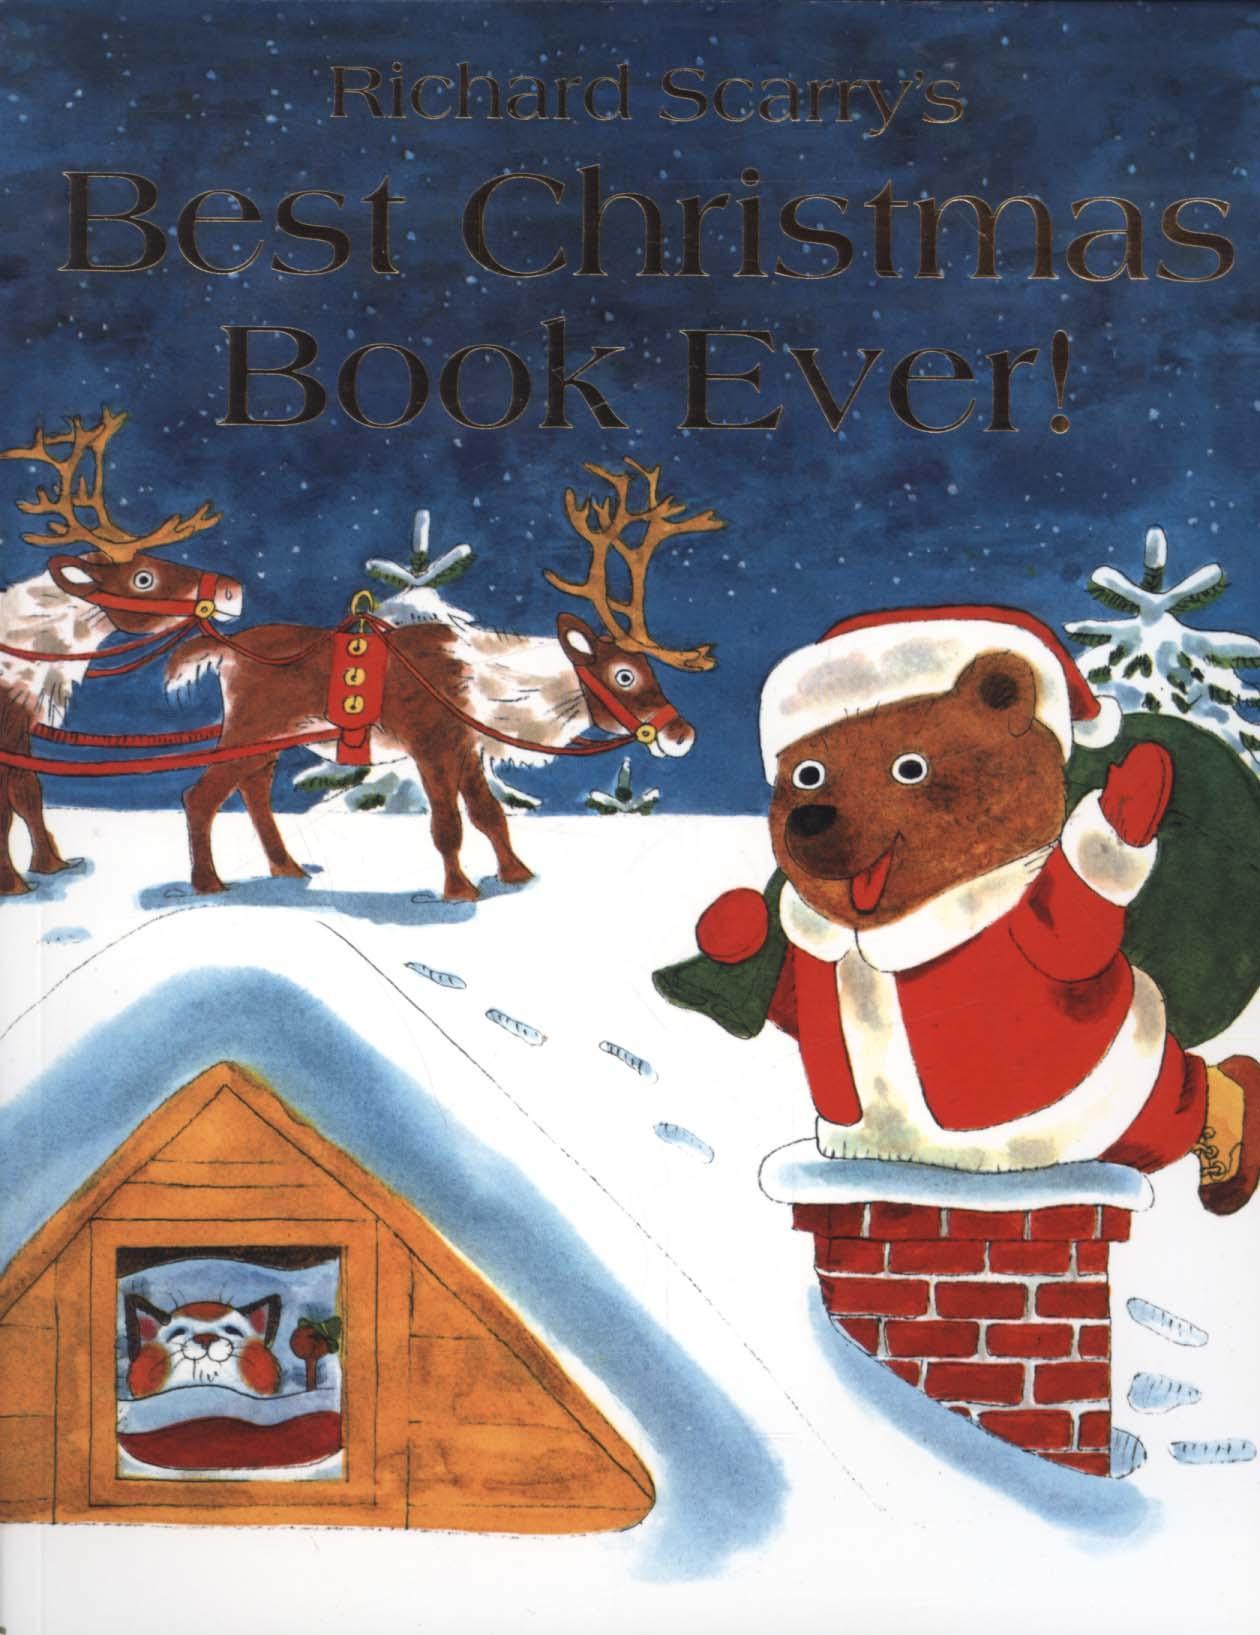 Best Christmas Book Ever! - Richard Scarry